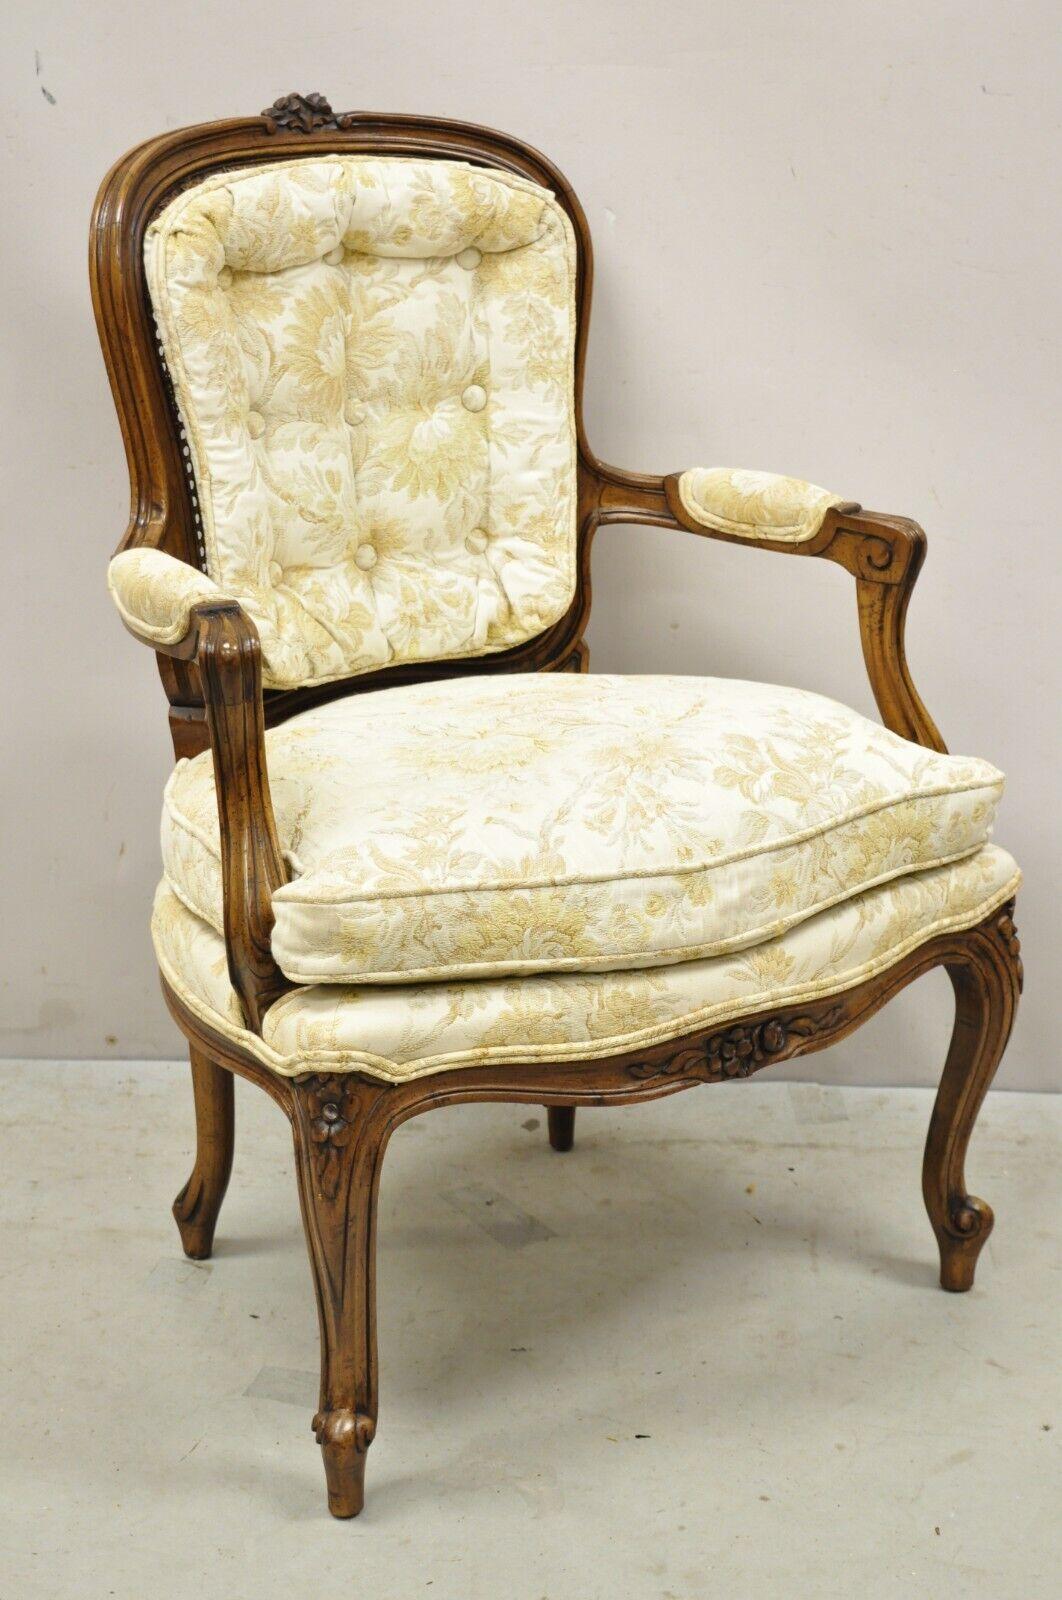 Vintage Heritage French Louis XV Style Cane Back Fauteuil Arm  Chair. Item  Solid wood frame, distressed finish, nicely carved details original label, cabriole legs, quality American craftsmanship, great style and form. Circa Late 20th Century.